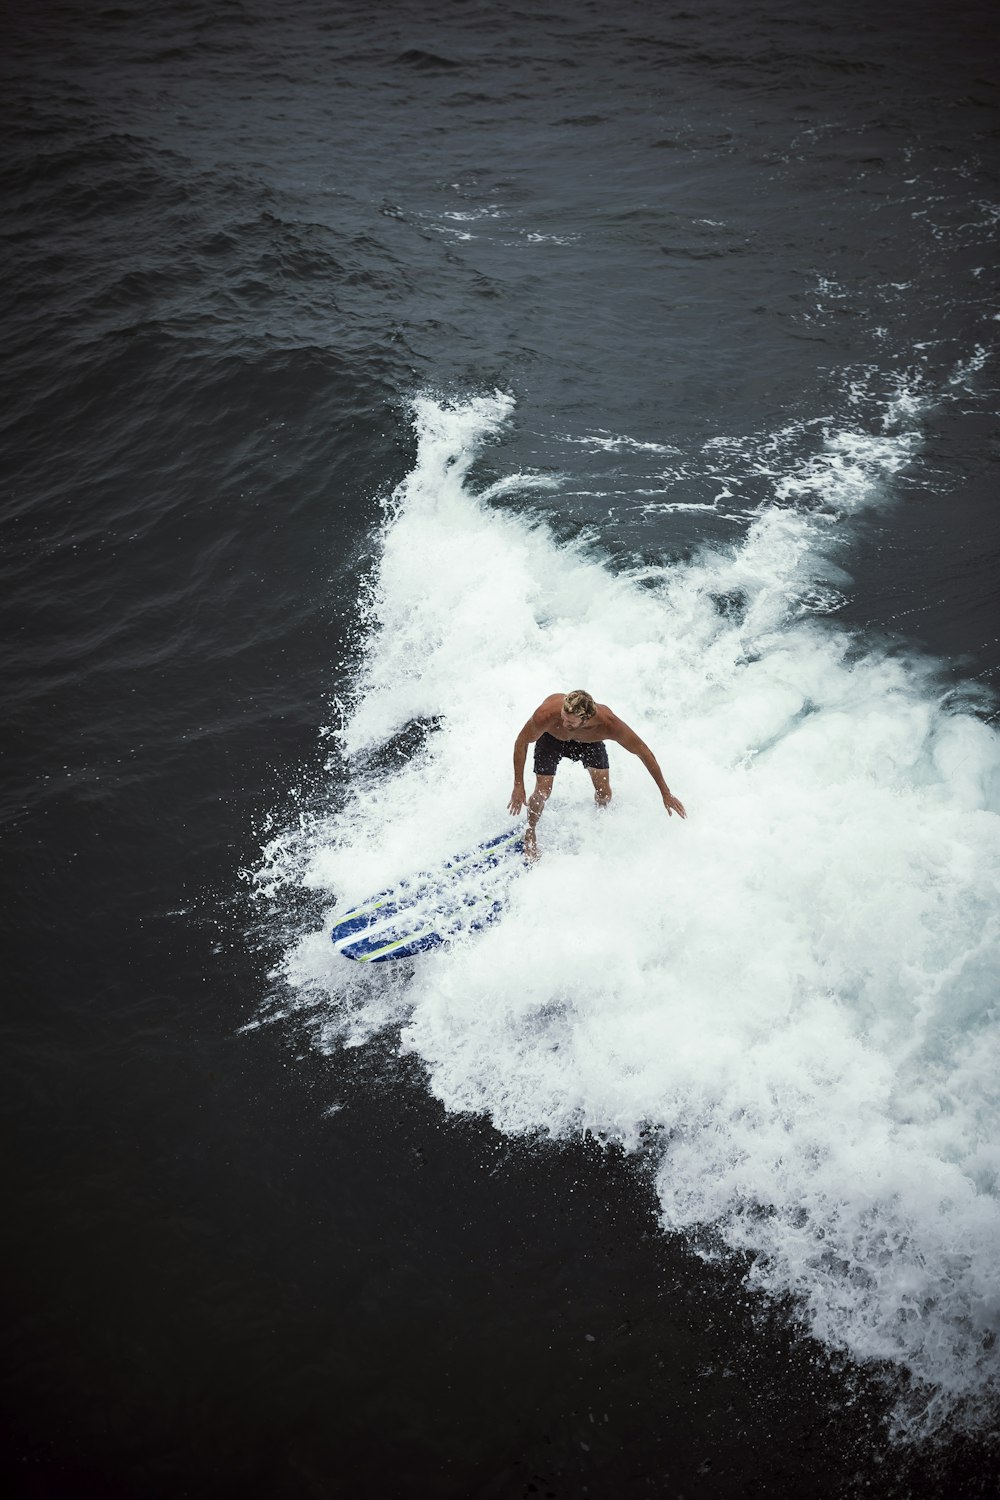 person surfboarding on waves